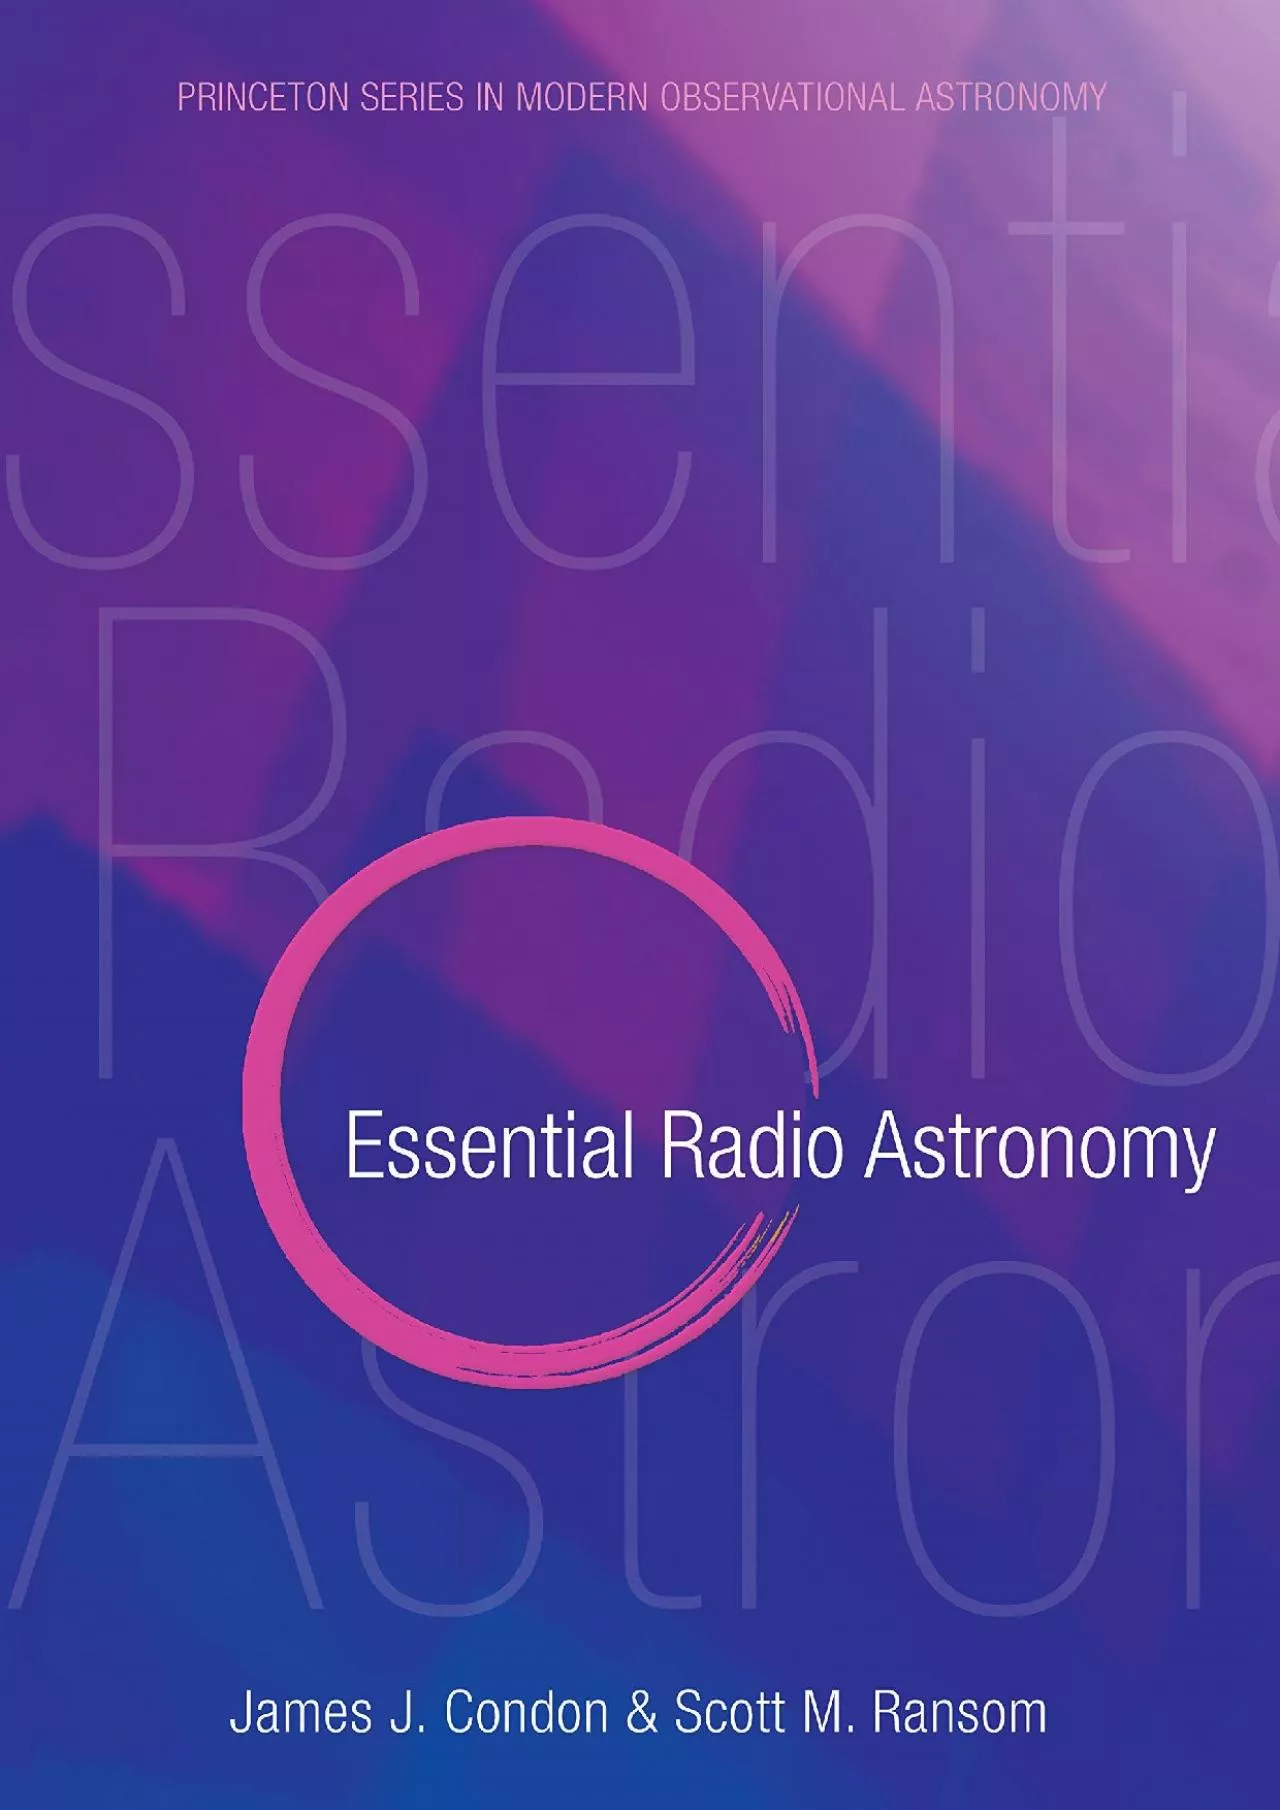 (BOOK)-Essential Radio Astronomy (Princeton Series in Modern Observational Astronomy,